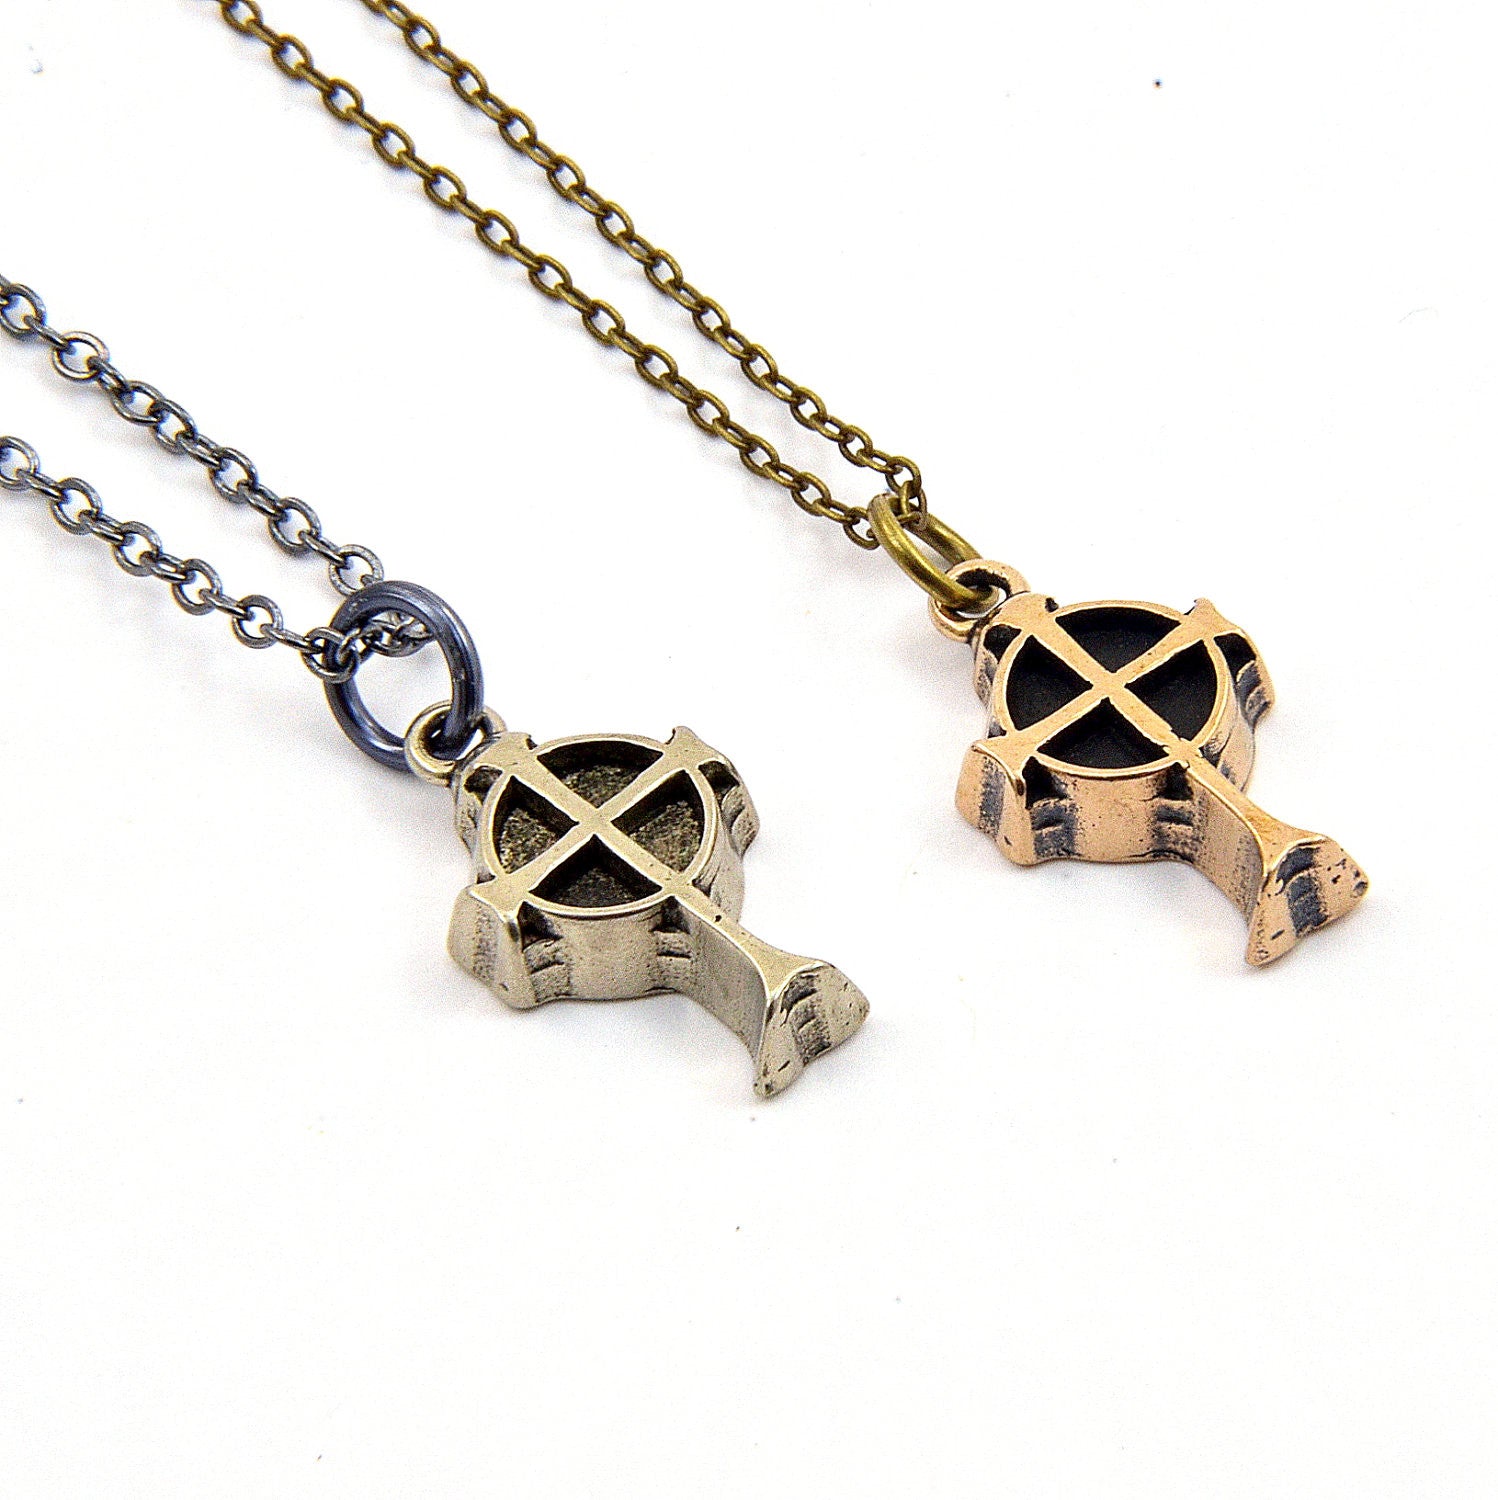 Celtic Cross Necklace - Gwen Delicious Jewelry Designs